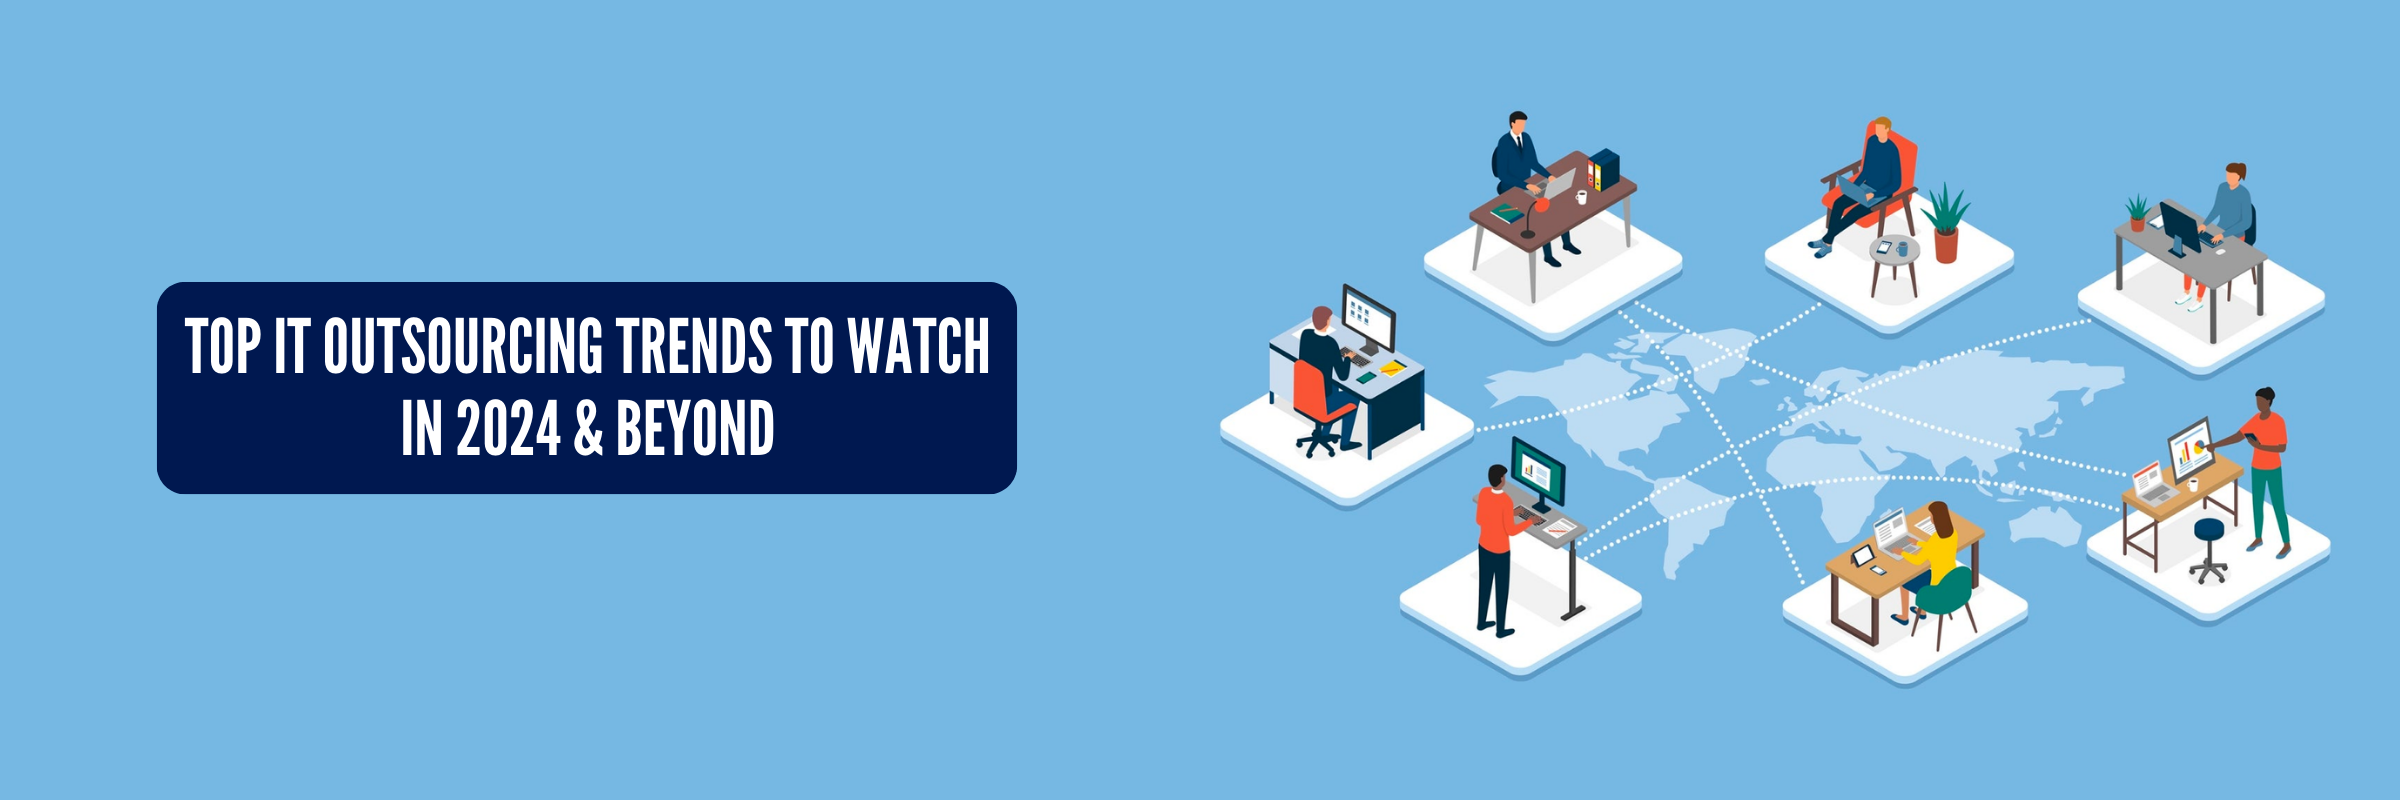 Top IT Outsourcing Trends to Watch in 2024 & Beyond